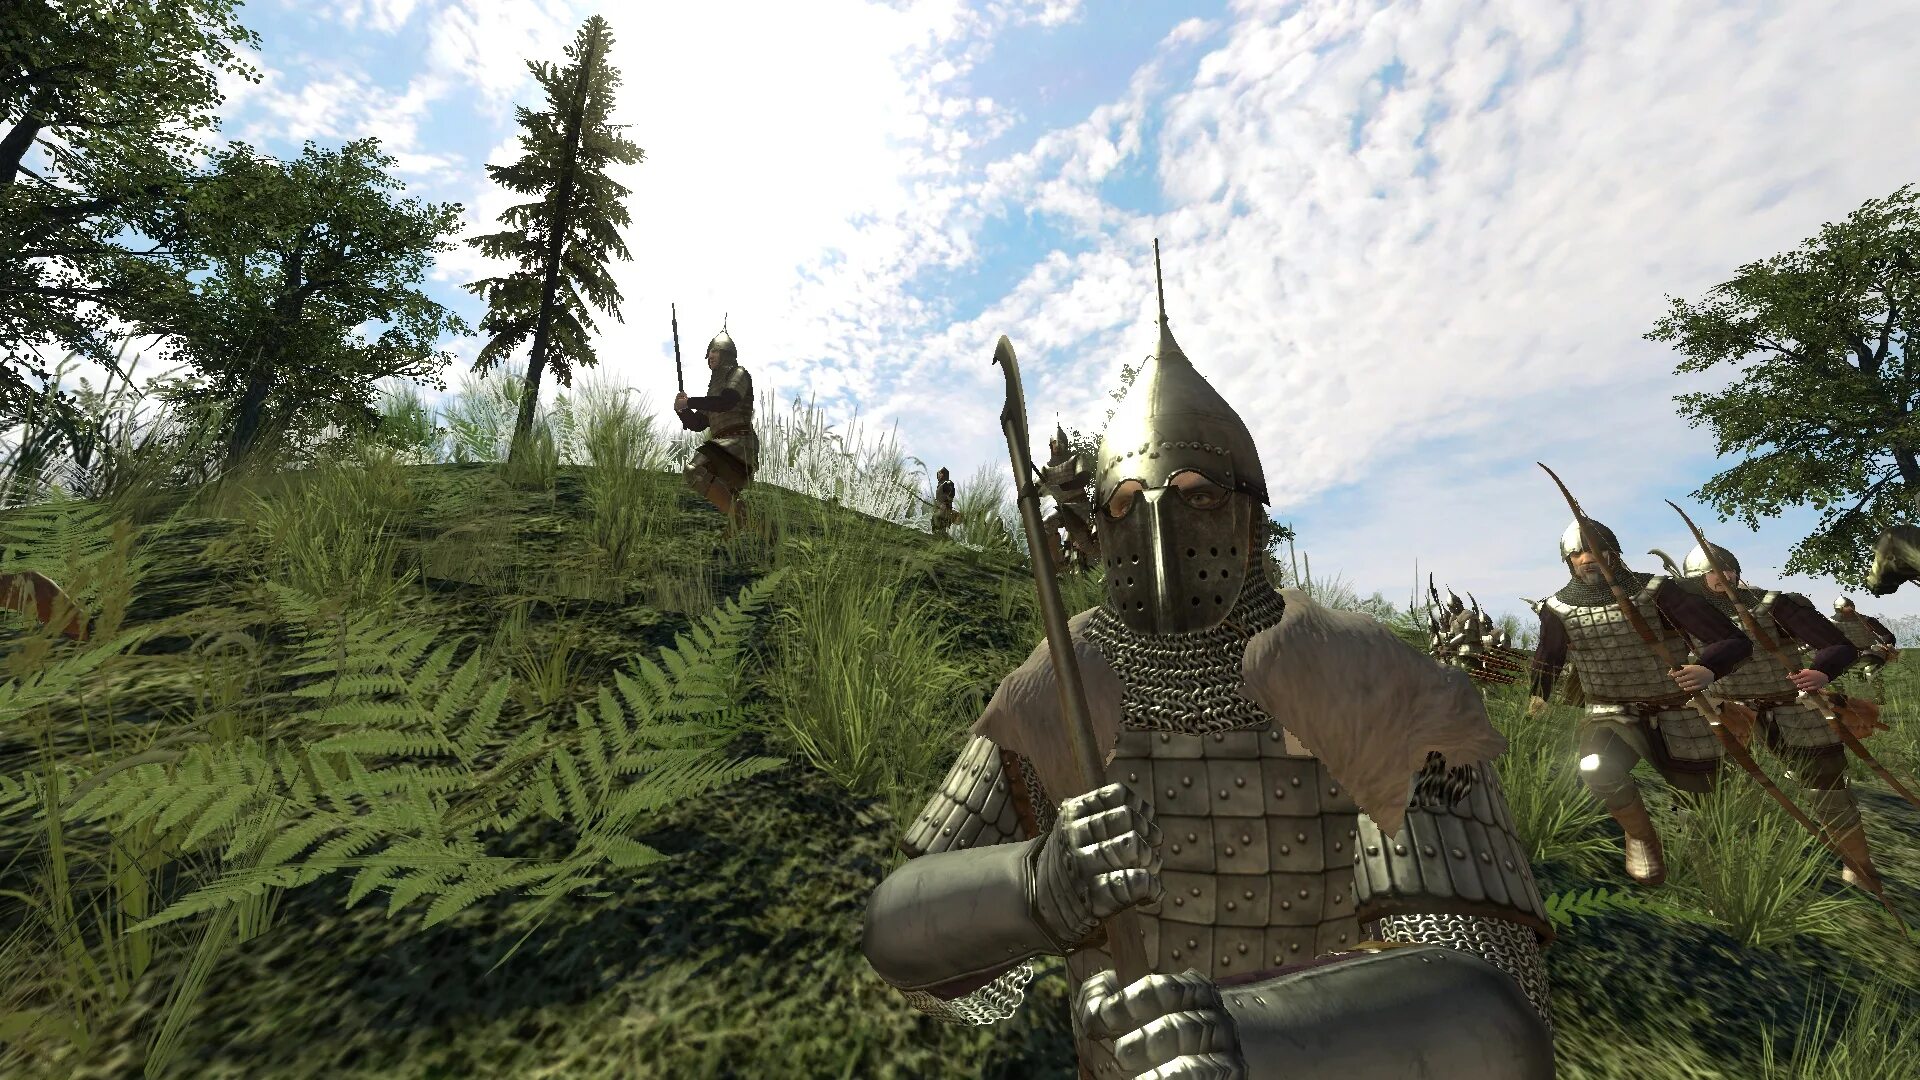 Mount & Blade: Warband. Mount and Blade 2 Русь. Mount and Blade Русь 13. Игра Mount & Blade 3.